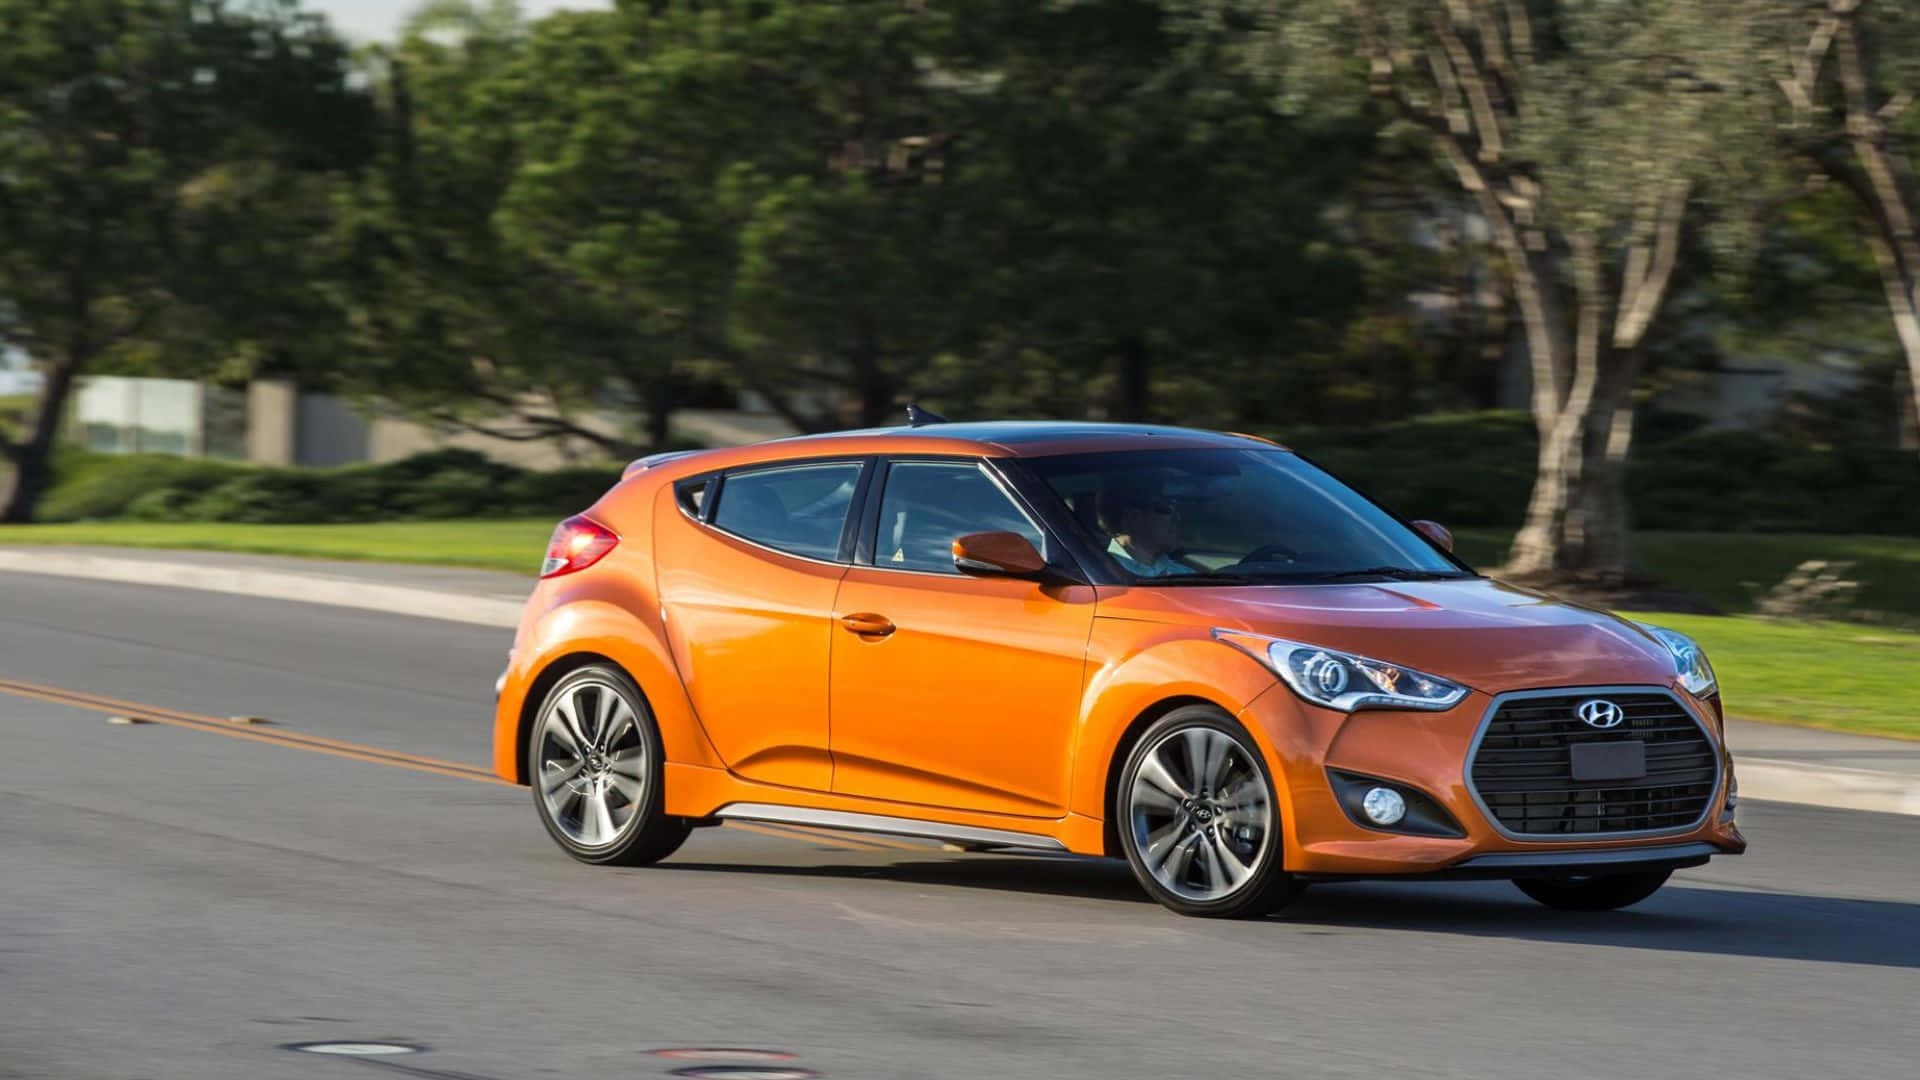 2014 Hyundai Veloster REFLEX  Wallpapers and HD Images  Car Pixel